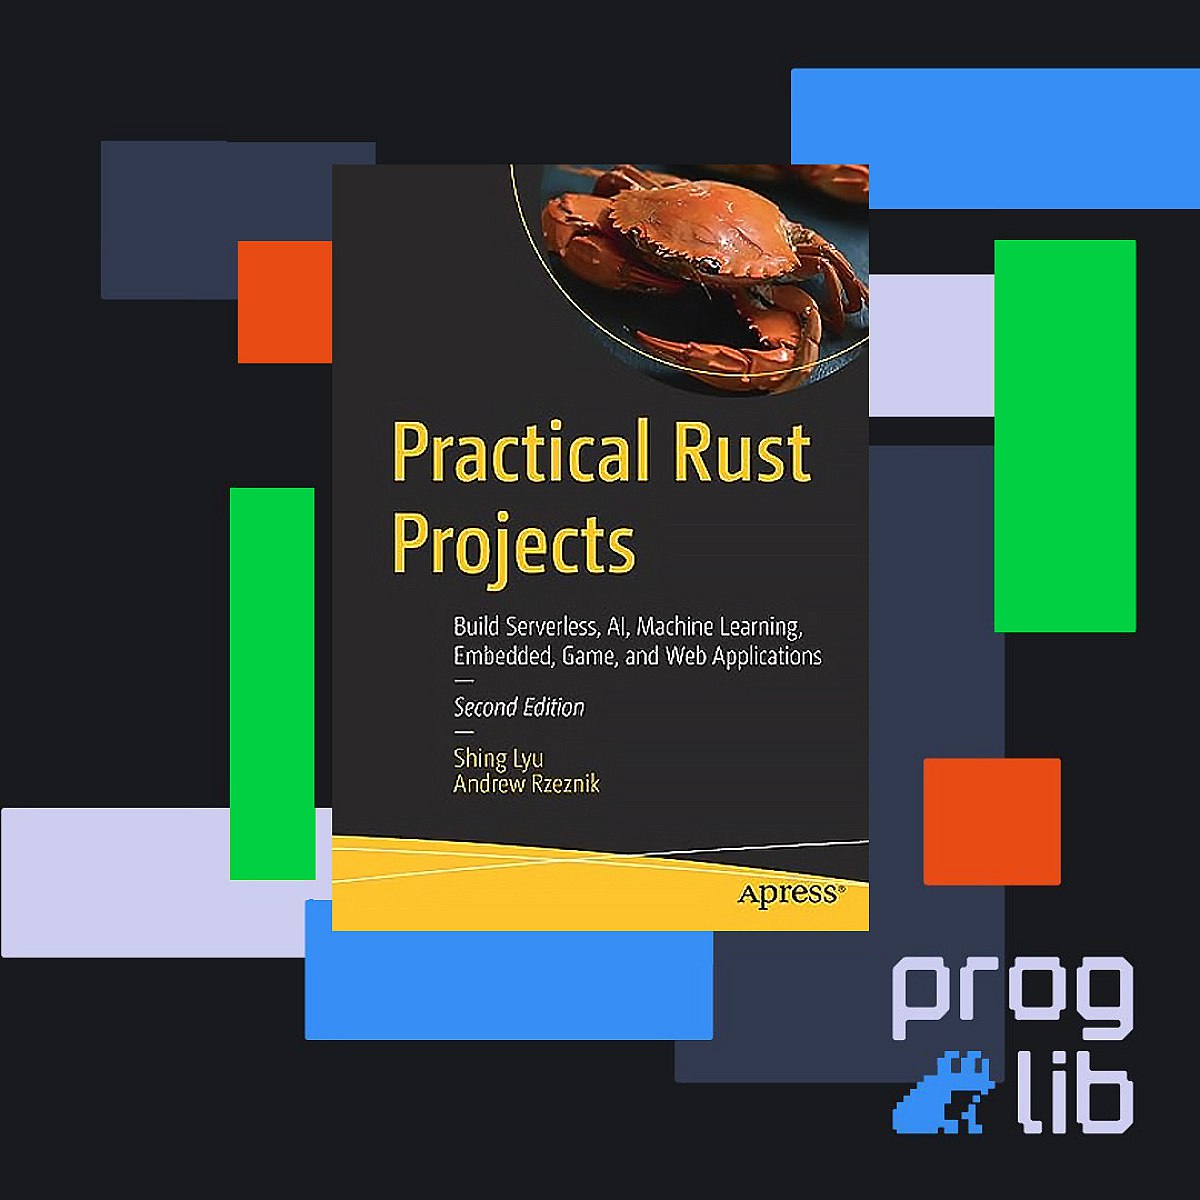 Practical rust projects pdf